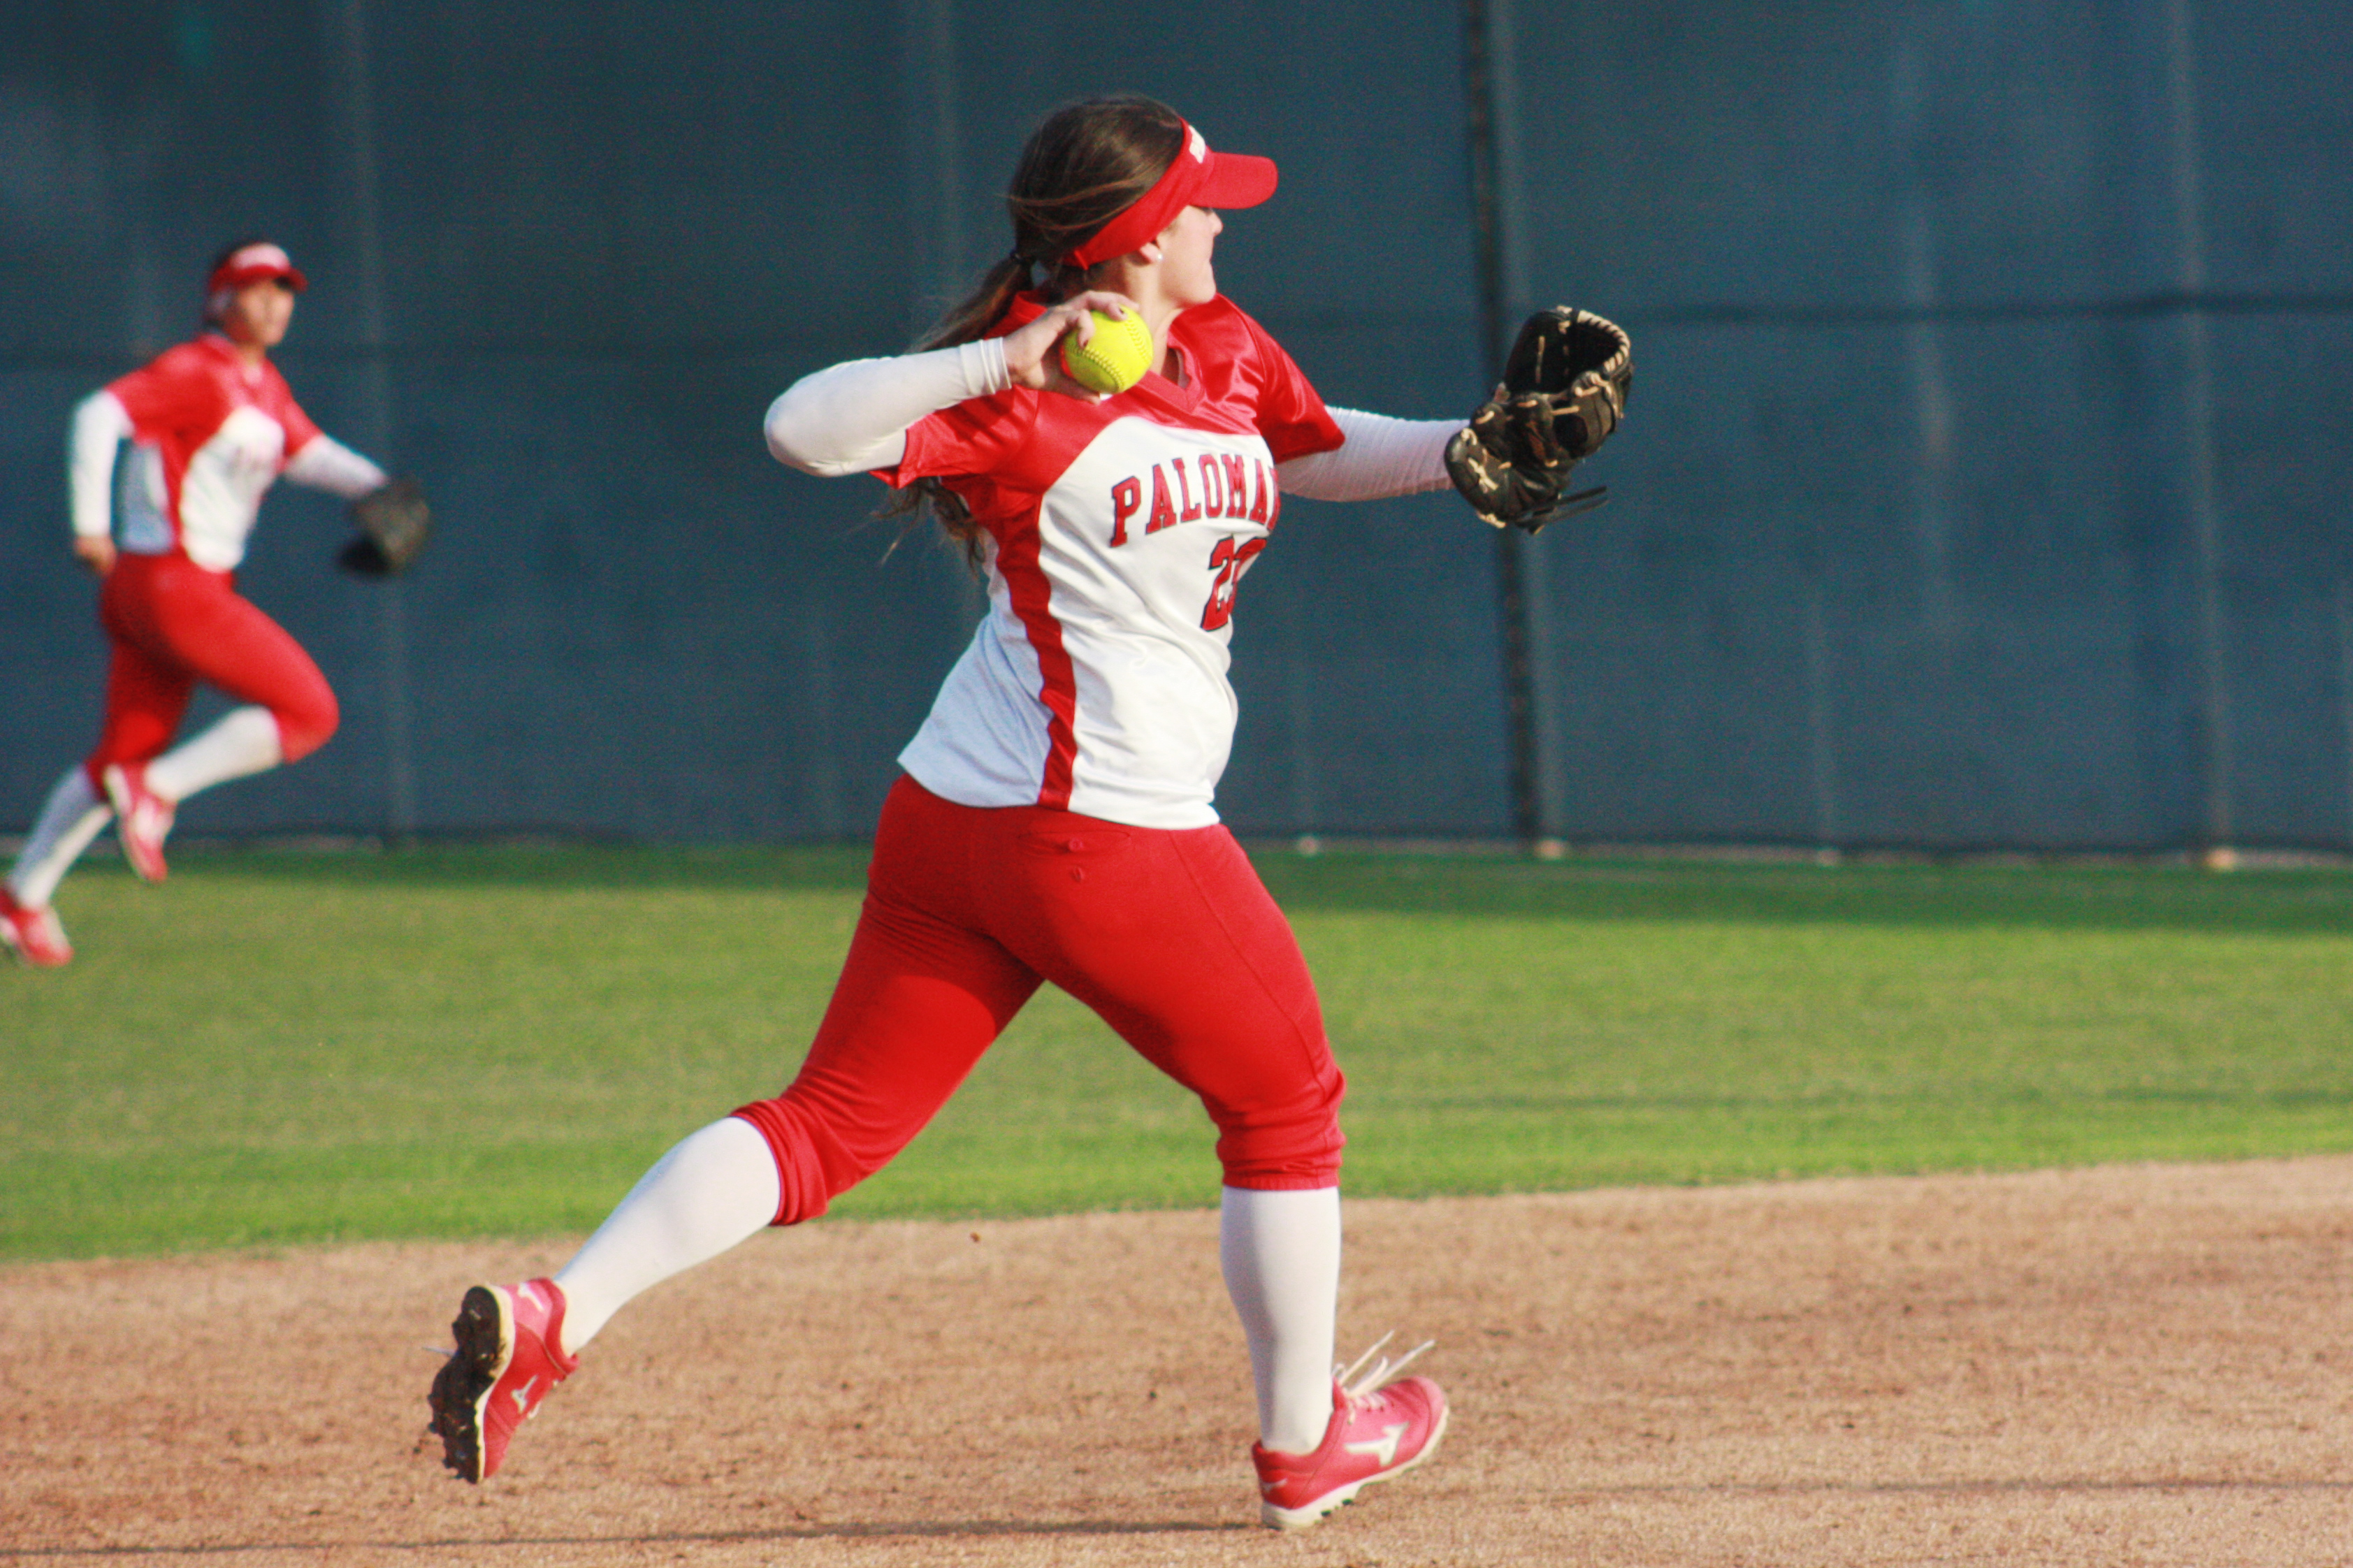 Palomar shortstop Kali Pugh fields a ground ball and throws to first baseman Paige Falconeiri against Citrus College on Feb 25 at Palomarâs softball field. The Comets picked up their 8th win in a row to improve their record to 9-1 on the season in their 4-1 win over the Owls. Scott Colson/The Telescope